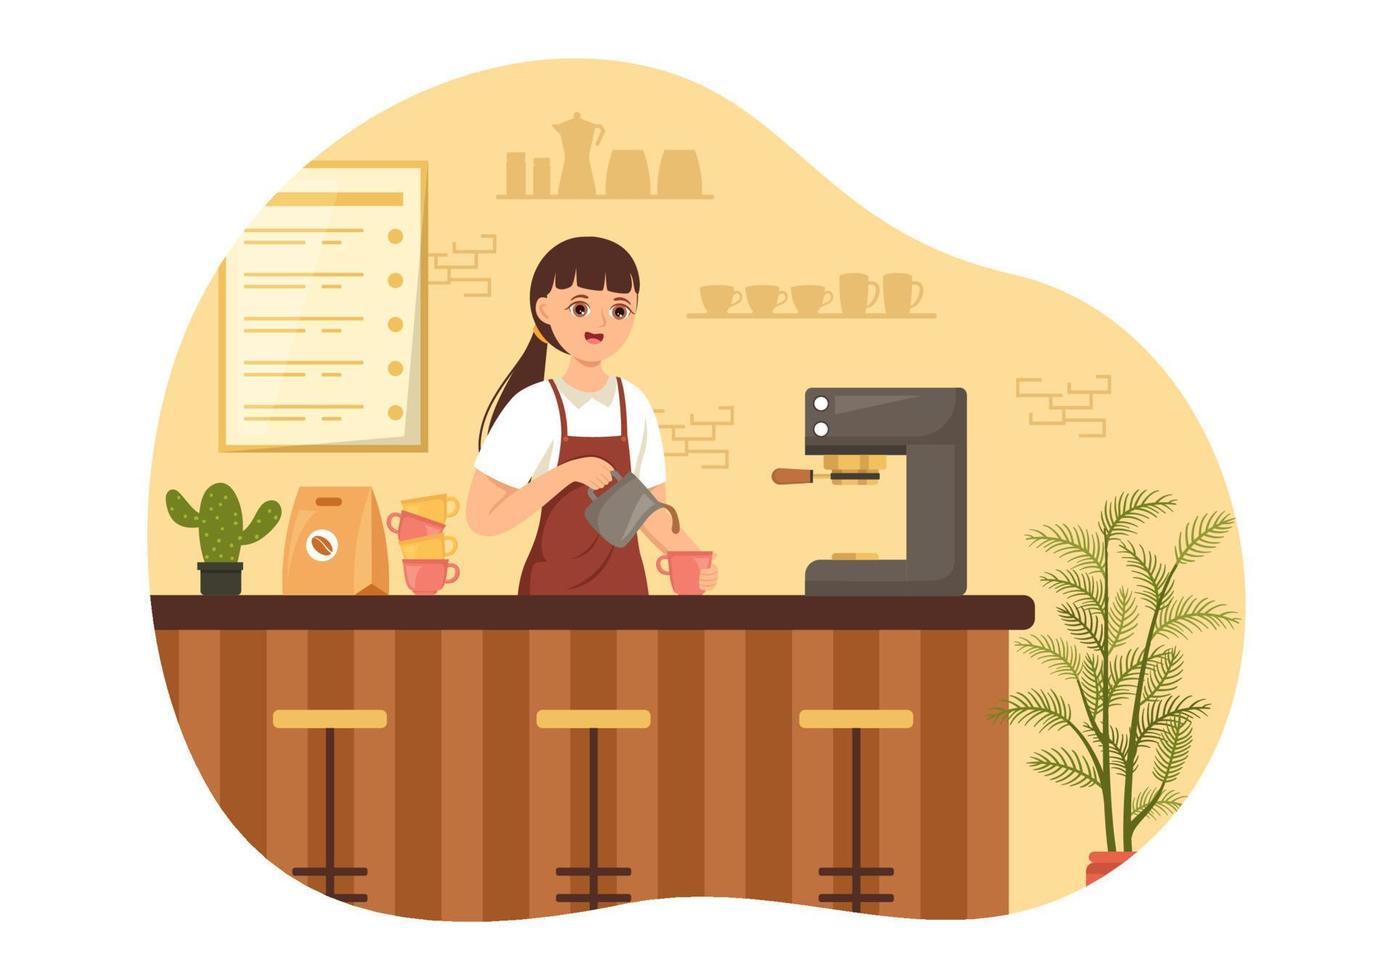 Barista Illustration With Wearing Standing Apron Making Coffee for Customer in Flat Cartoon Hand Drawn Landing Page or Web Banner Template vector